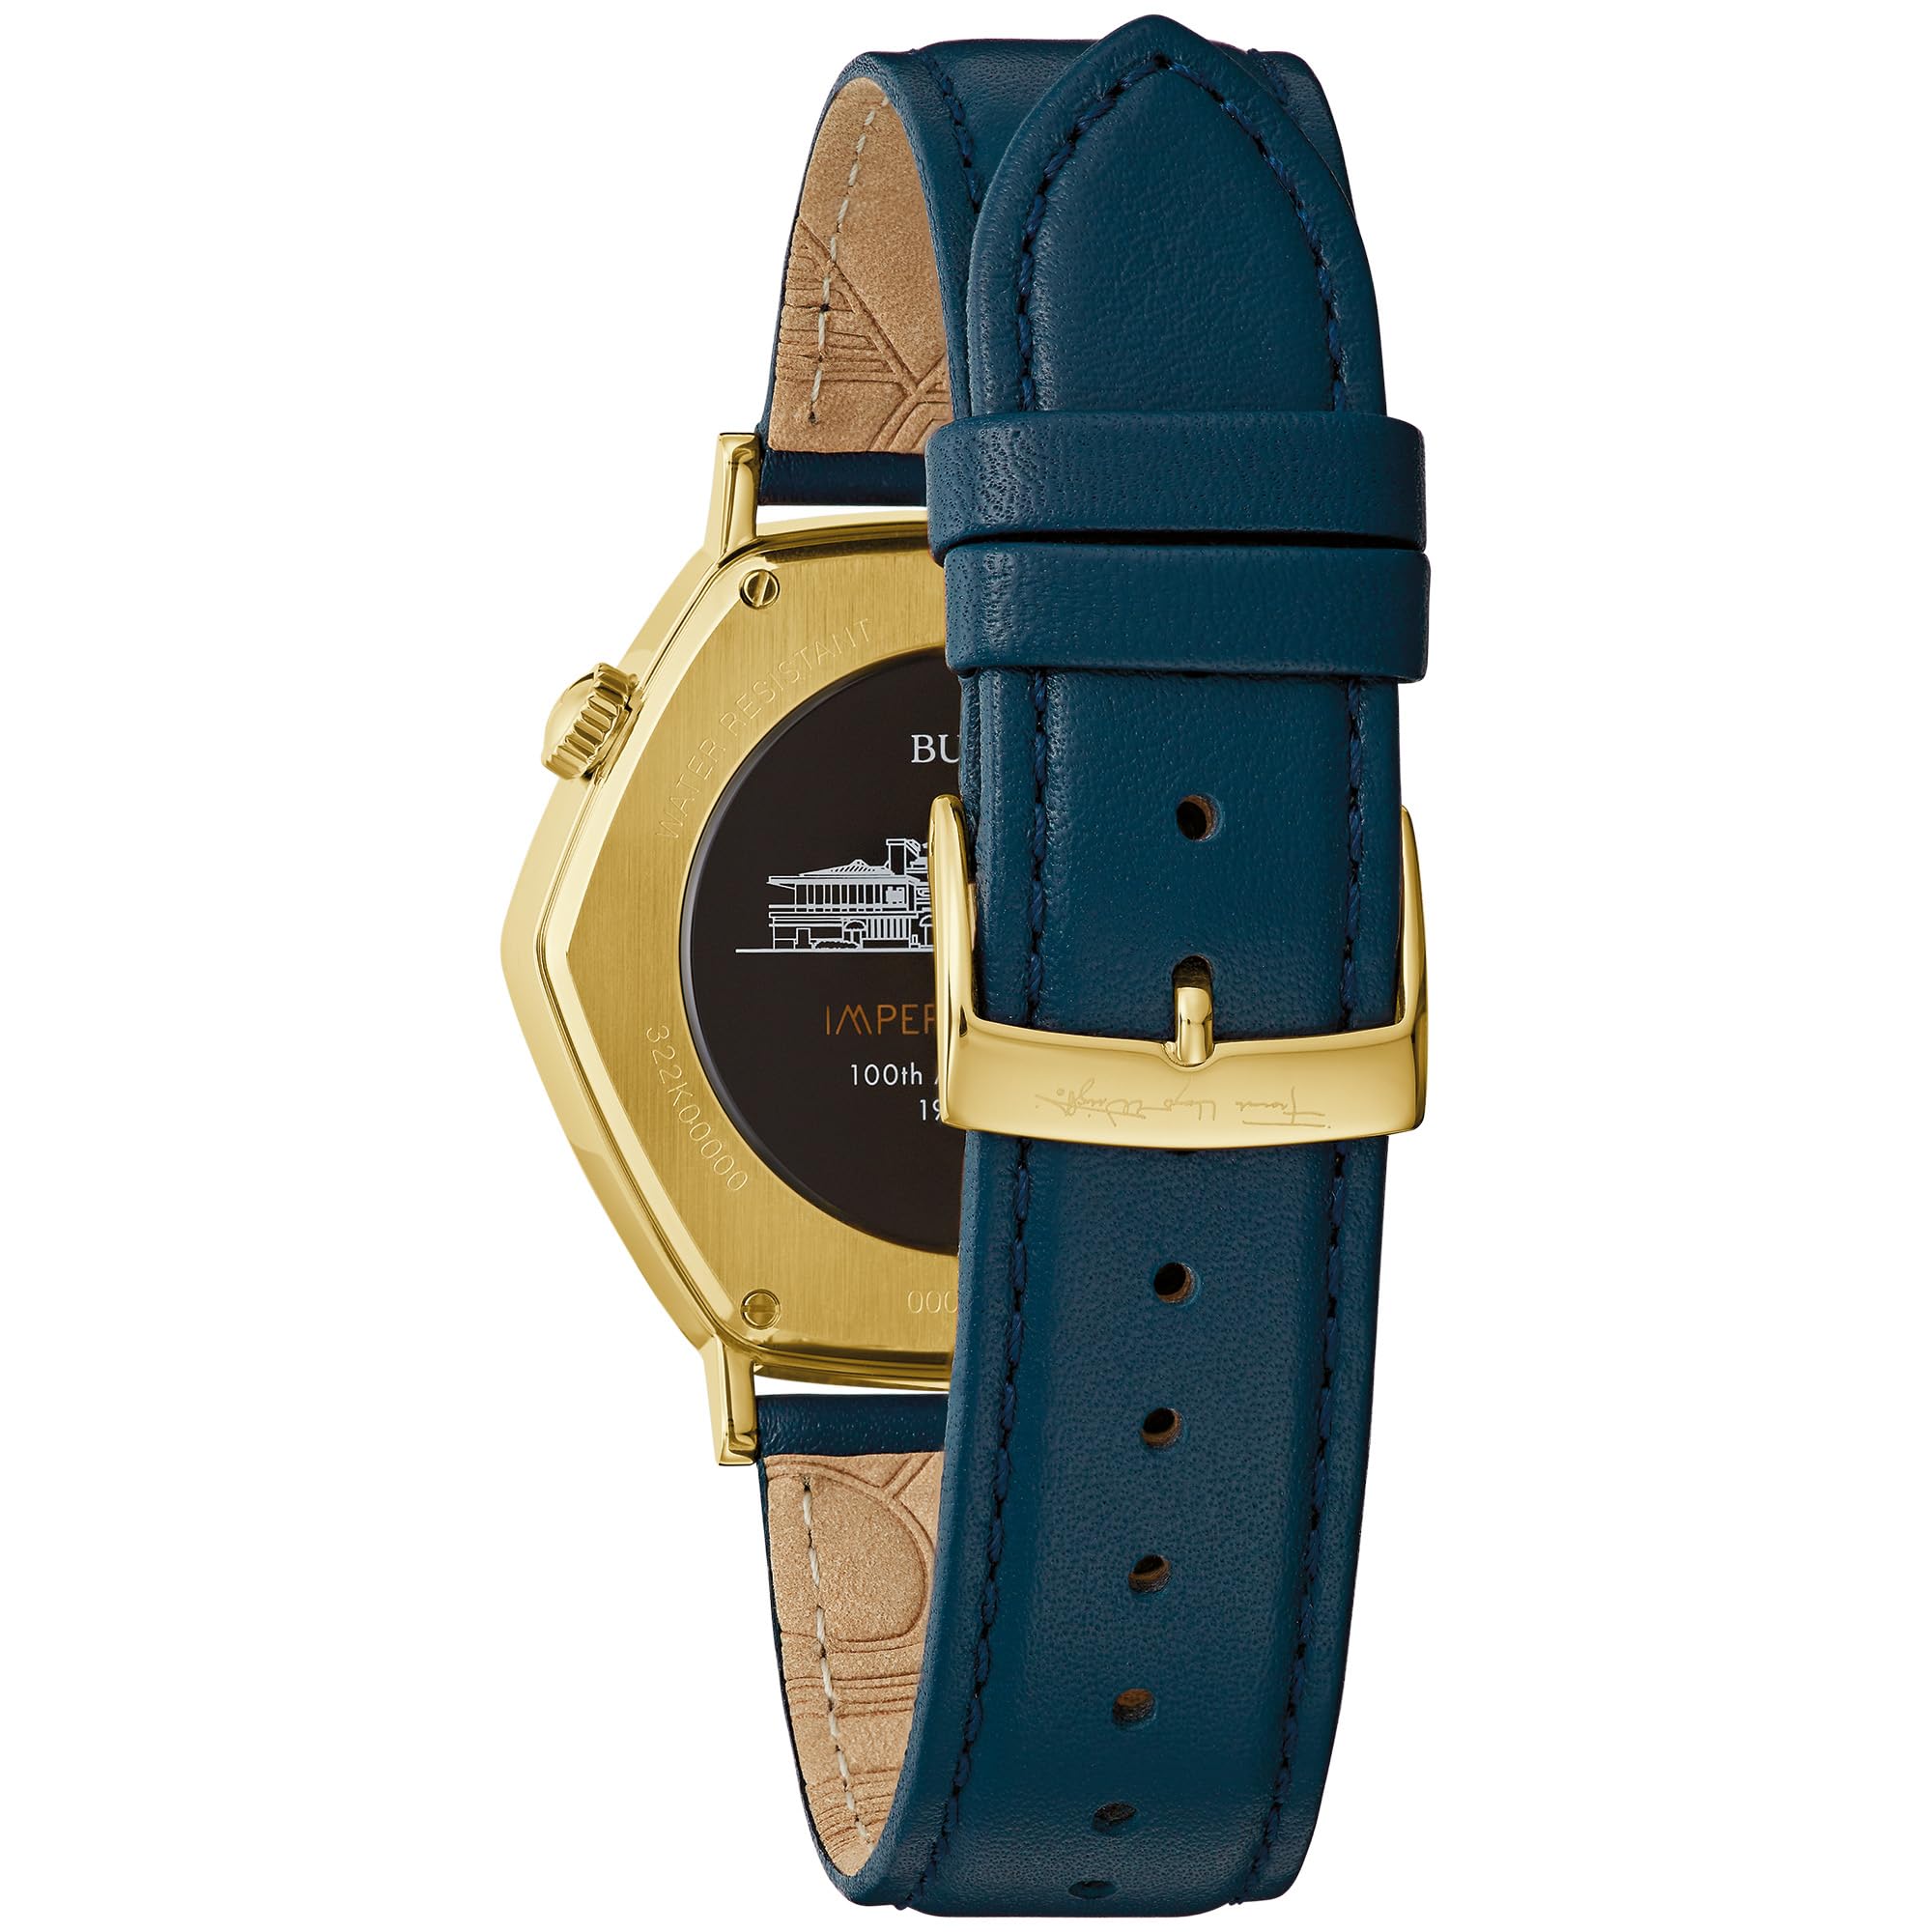 Bulova Men's Frank Lloyd Wright Limited Edition 'Imperial Hotel' Gold Stainless Steel 3 Hand Watch, Blue Leather Strap, and Mosaic Multi-Colored Dial (Model:97A177)